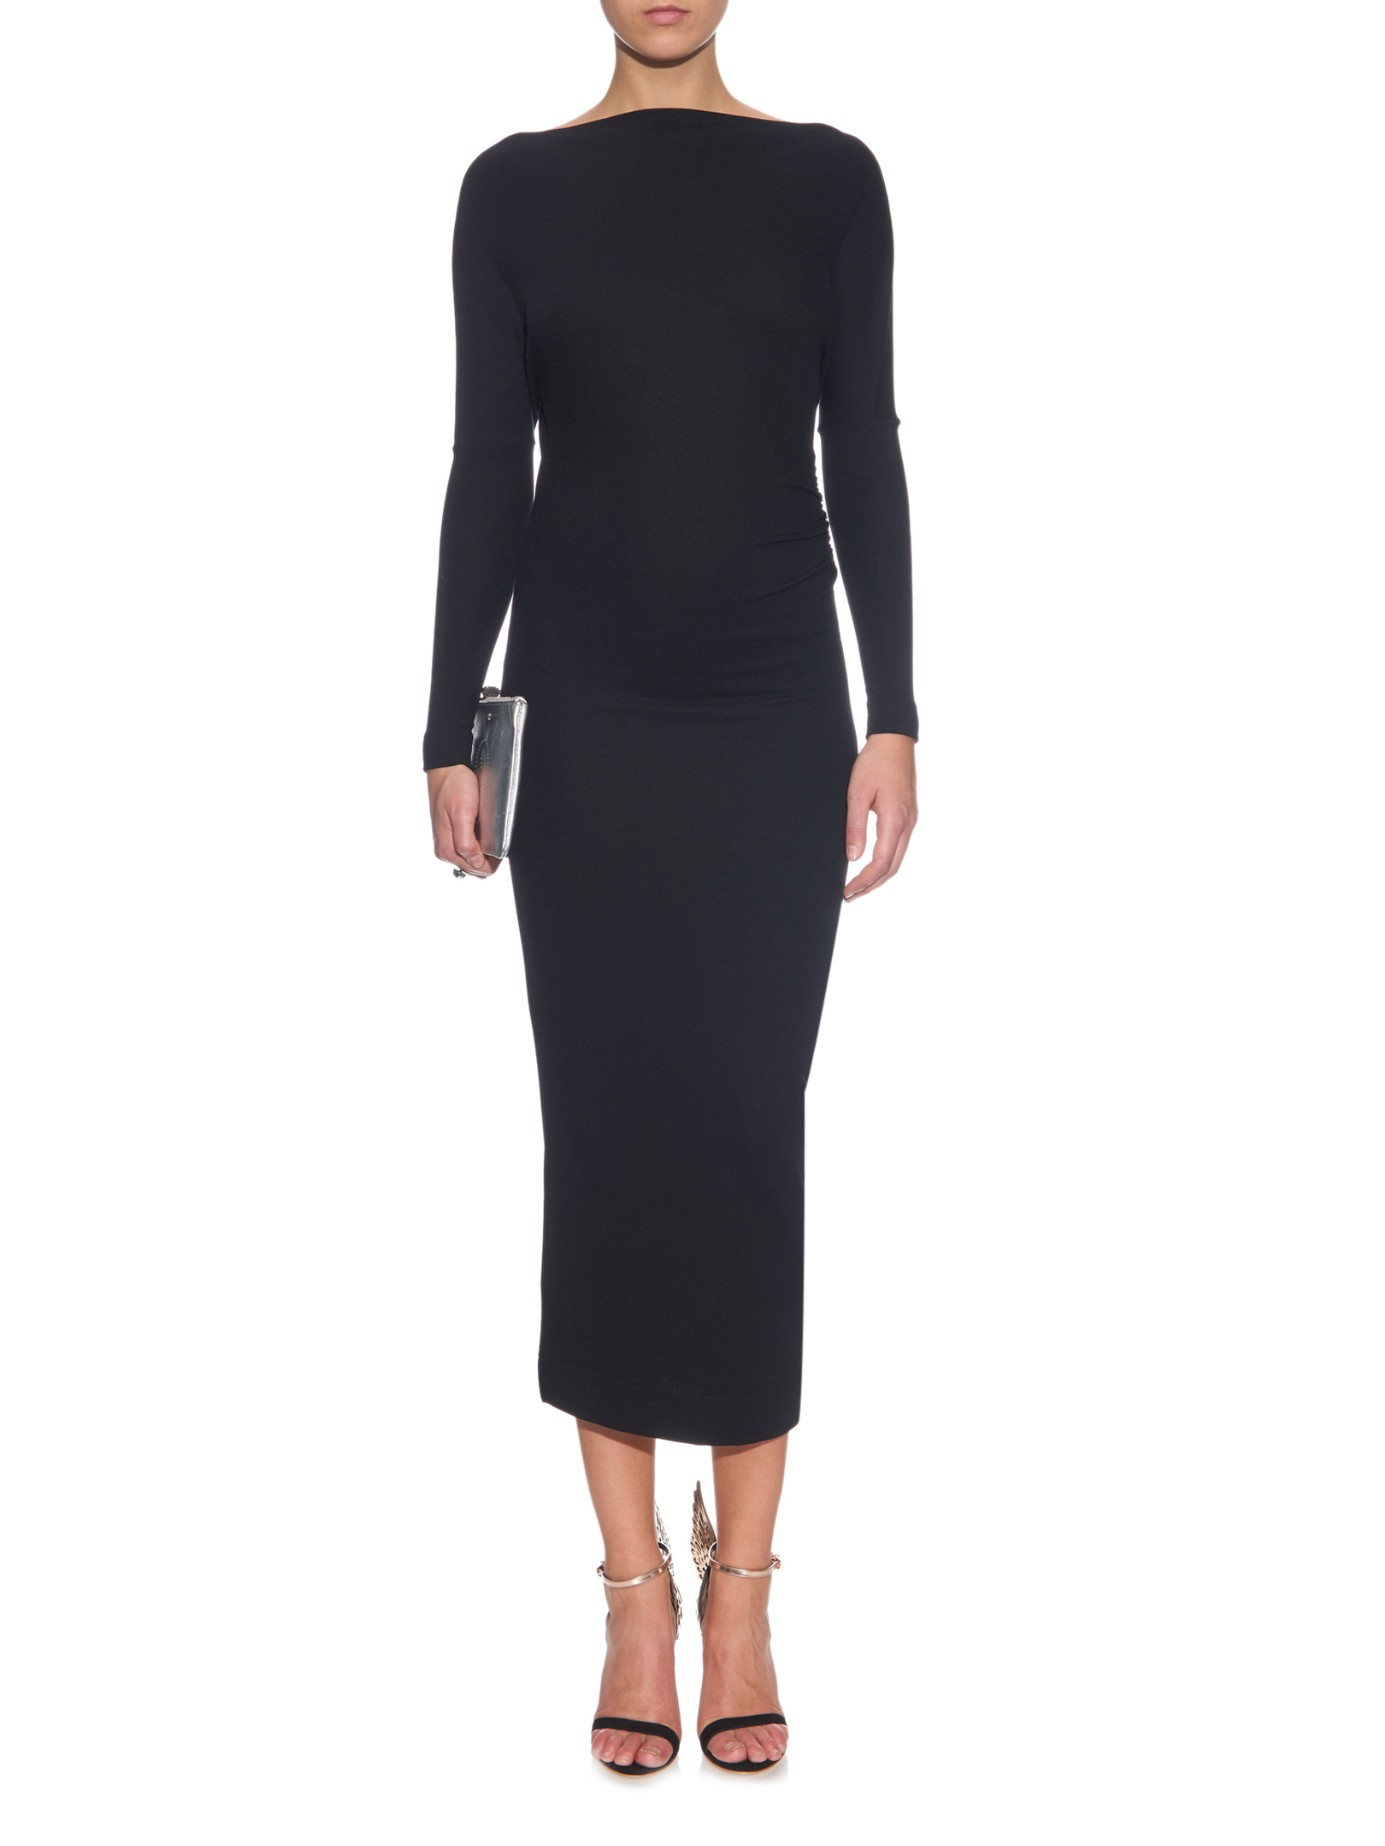 Lyst - Vivienne westwood anglomania Boat-Neck Jersey Midi Dress in Black